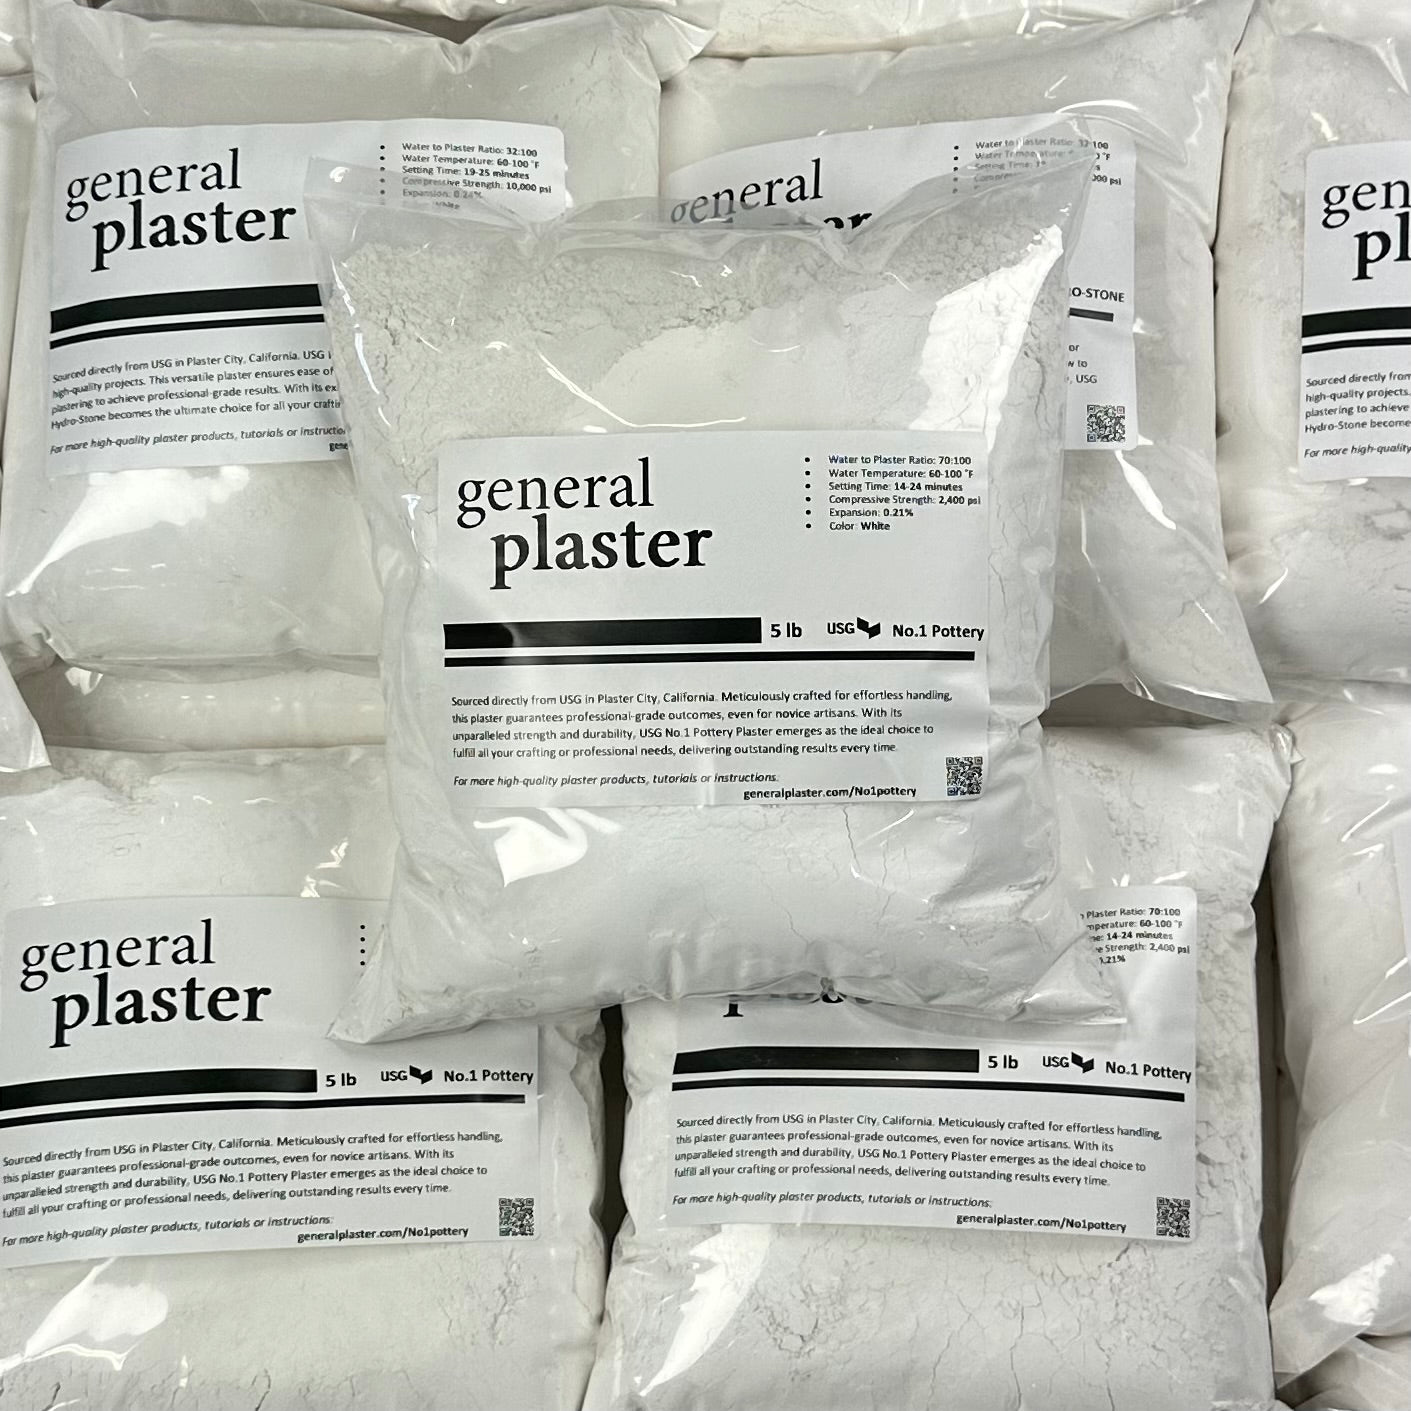 USG No. 1 Pottery Plaster - Sanitary Ware and General Casting Applications  - 50 pound bag